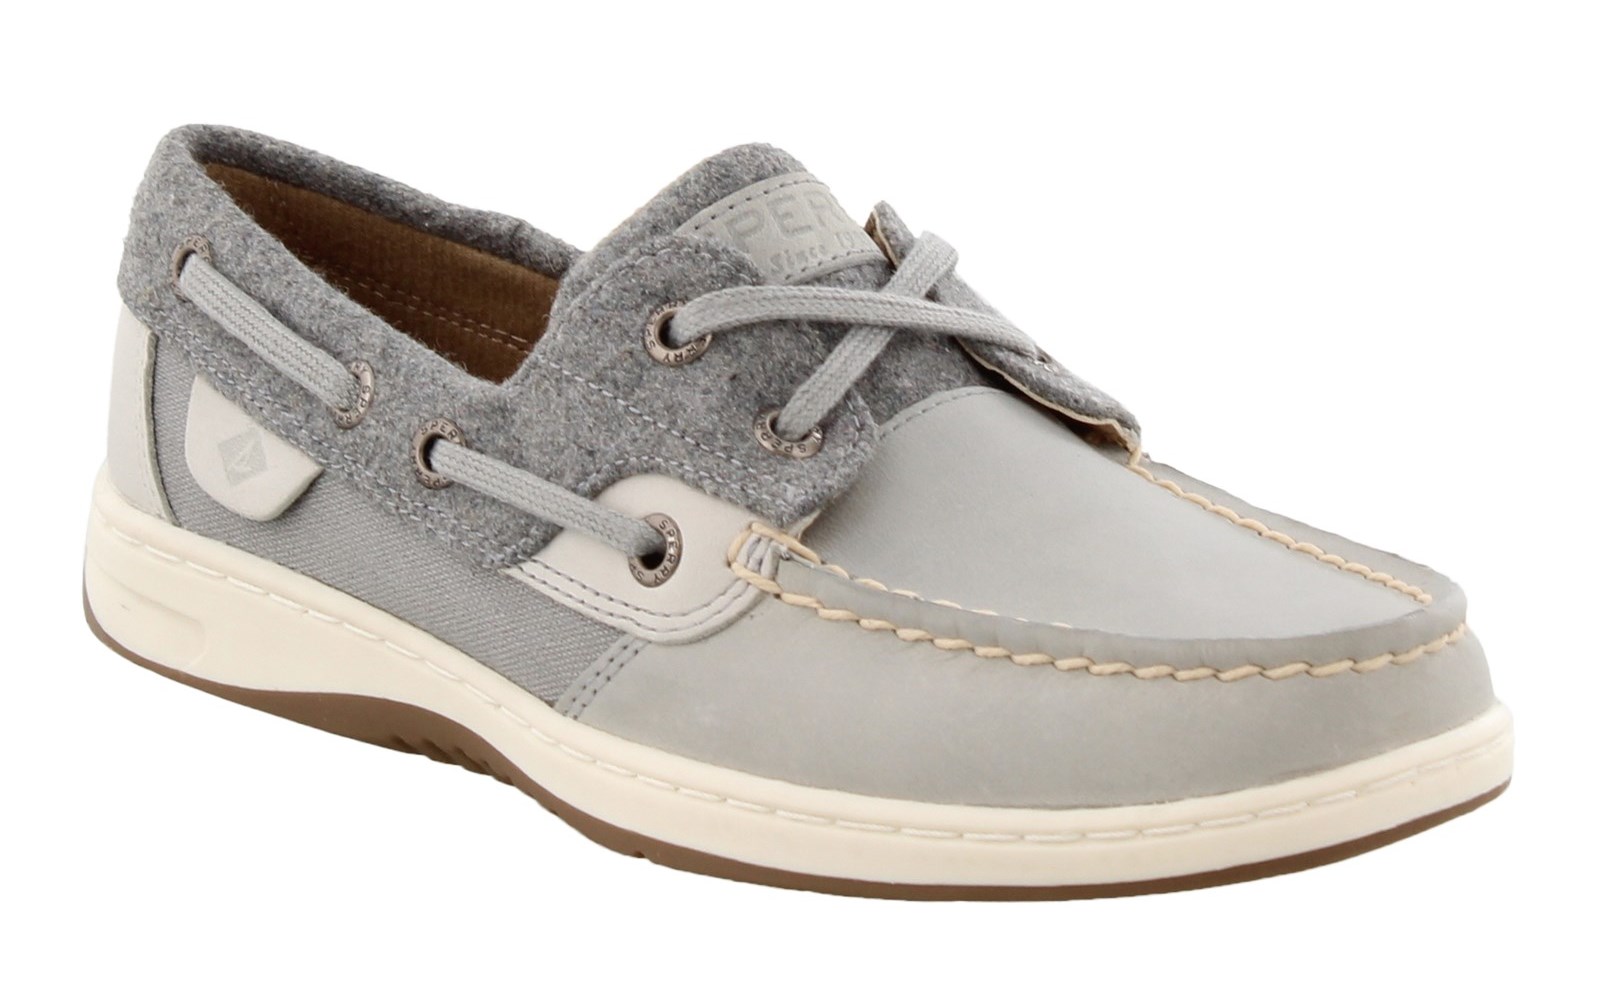 Sperry Womens Bluefish Boat Shoe -  Smoked Pearl - 6